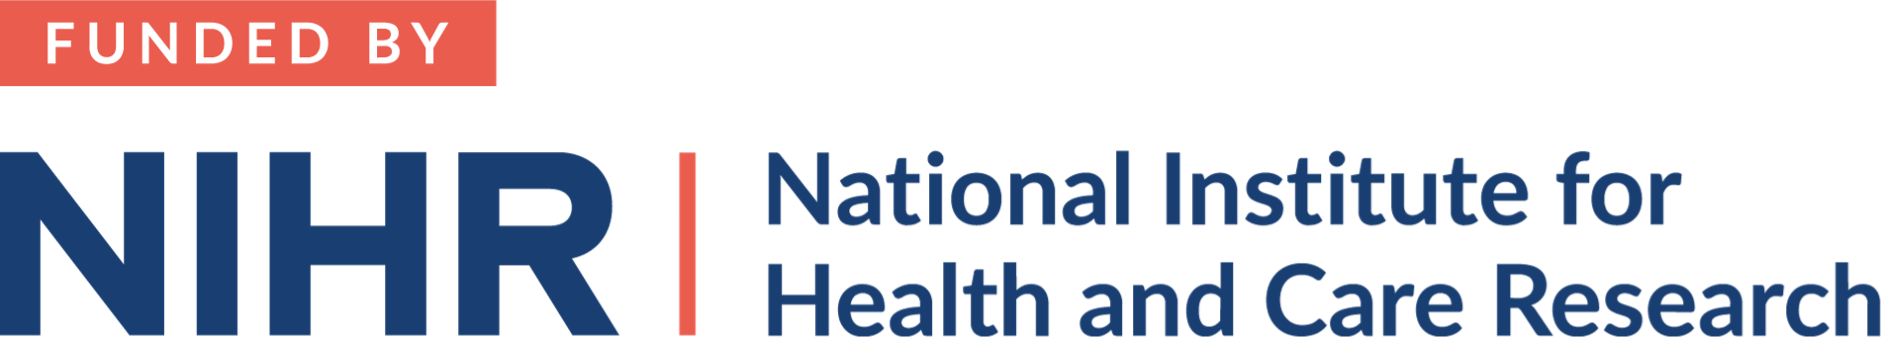 NIHR School of Primary Care Research logo